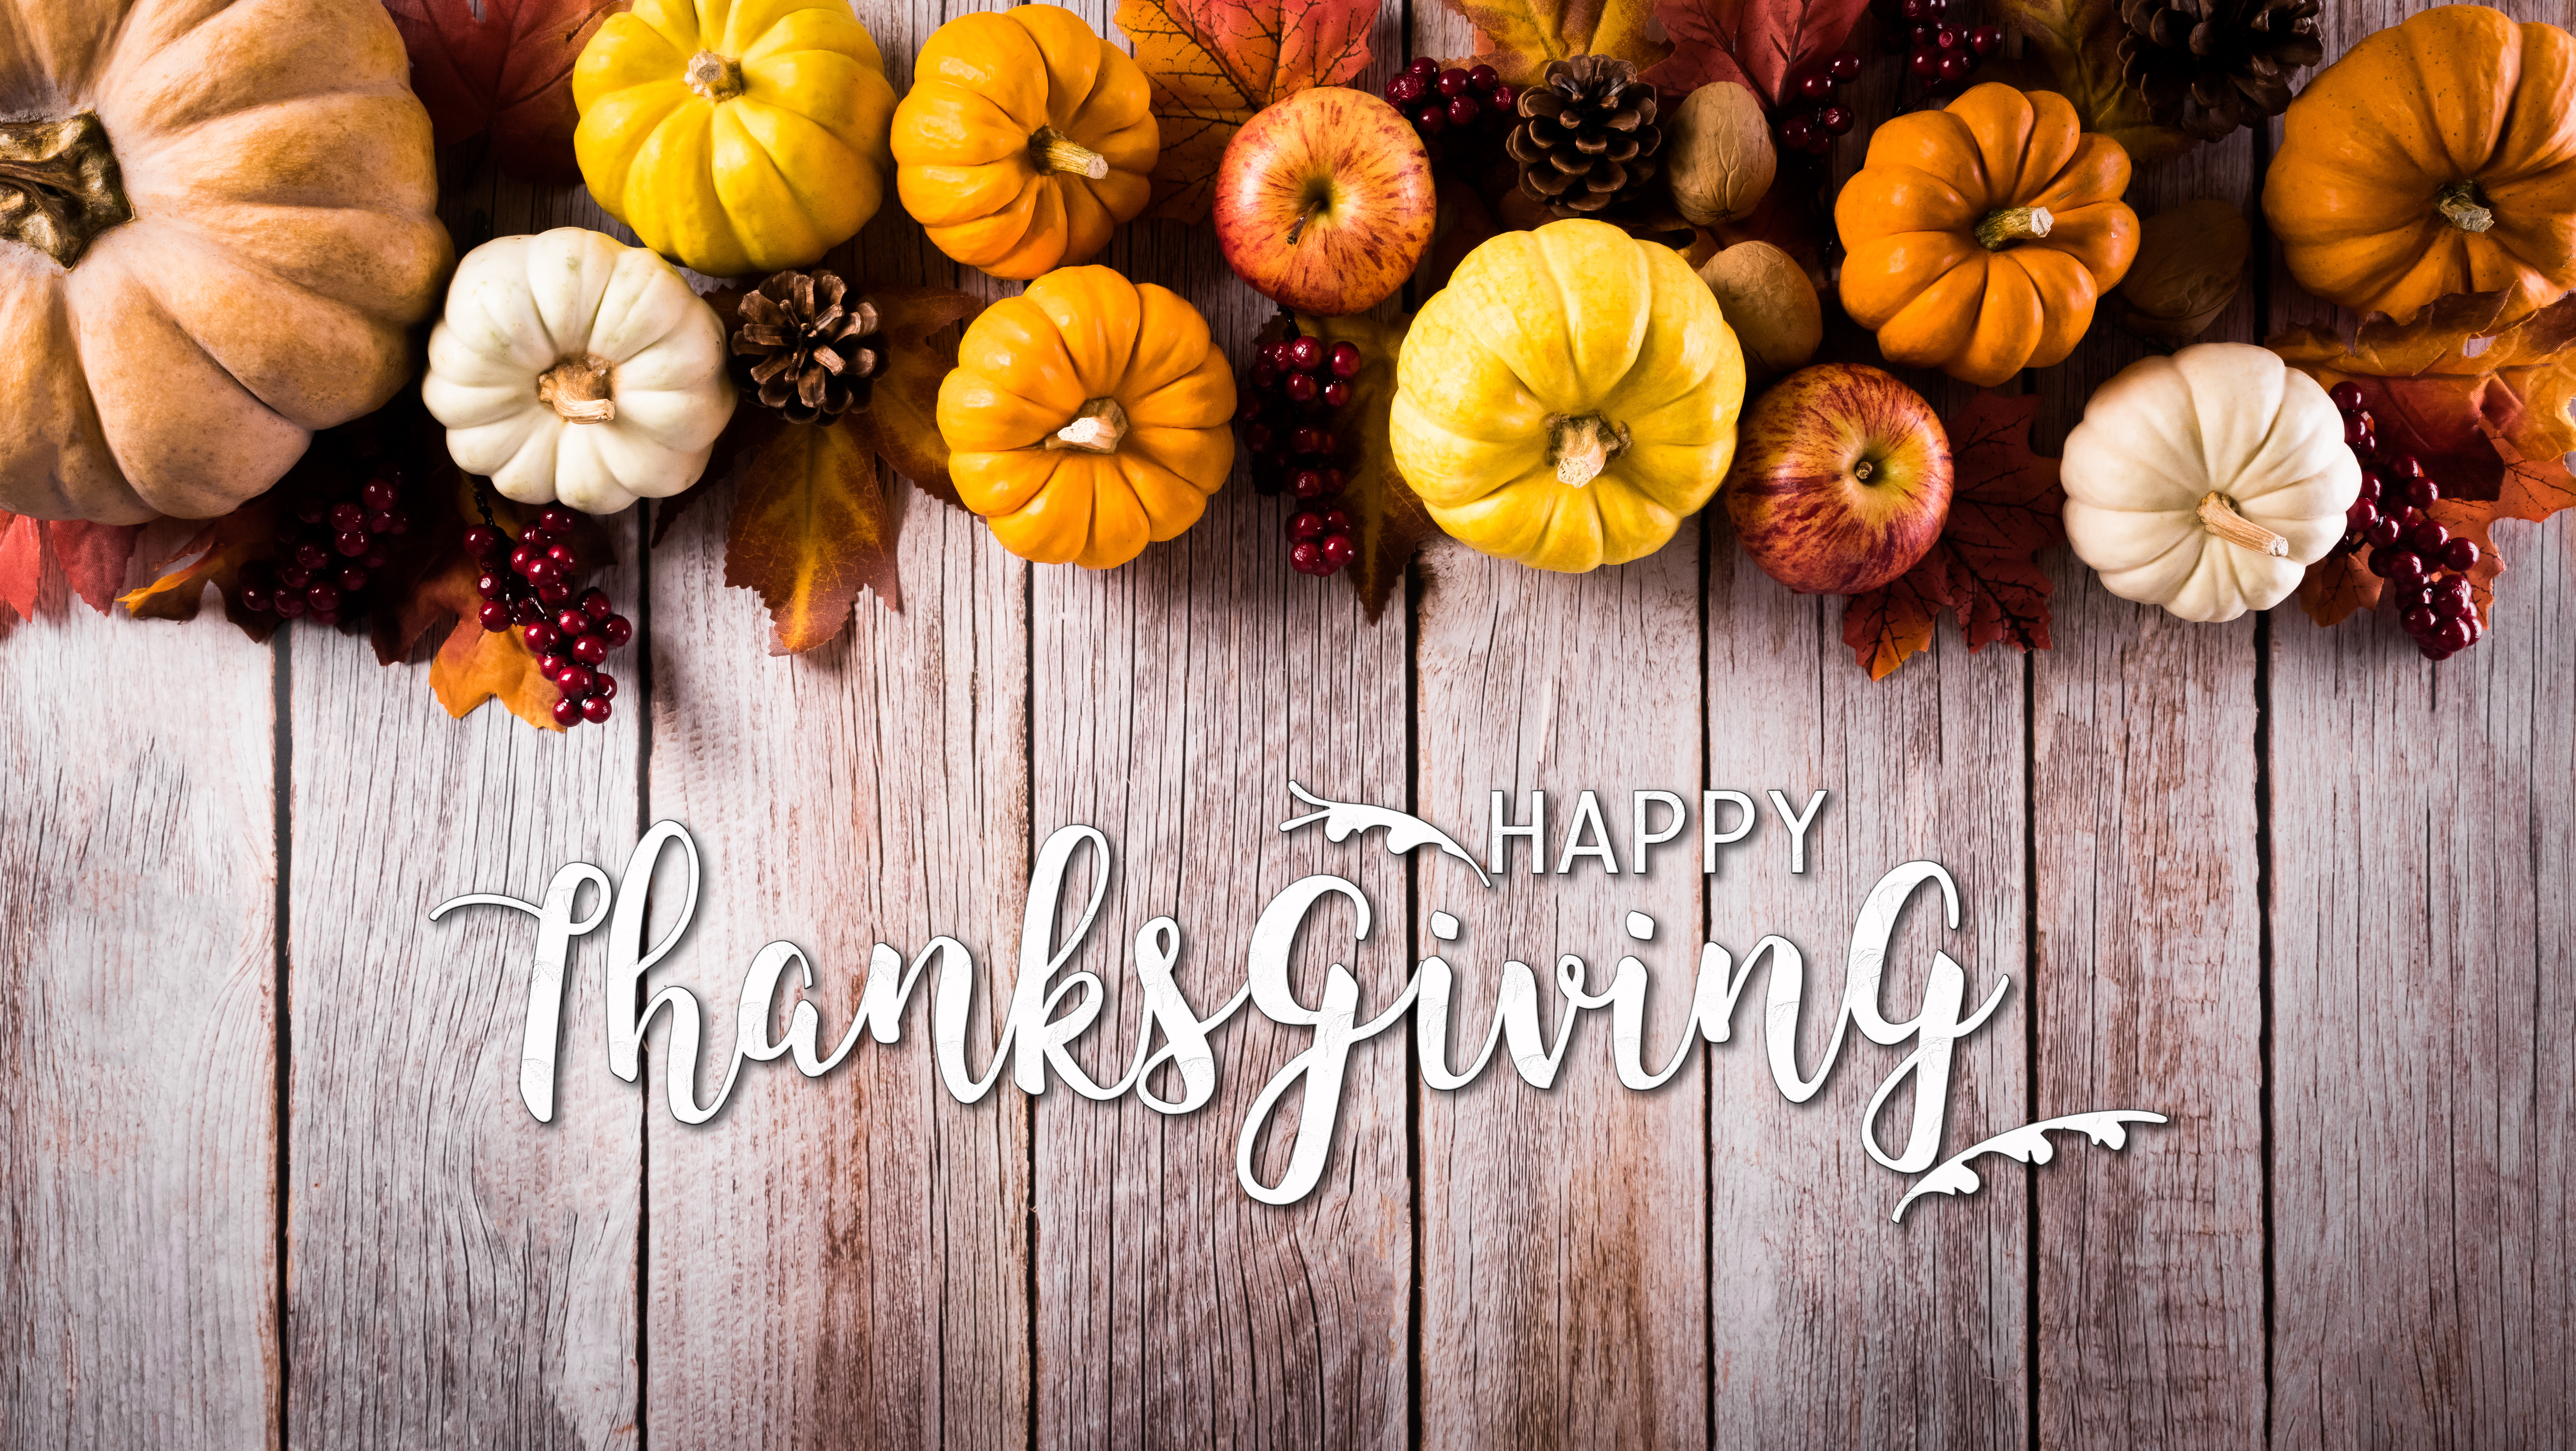 We hope you have a wonderful Thanksgiving!